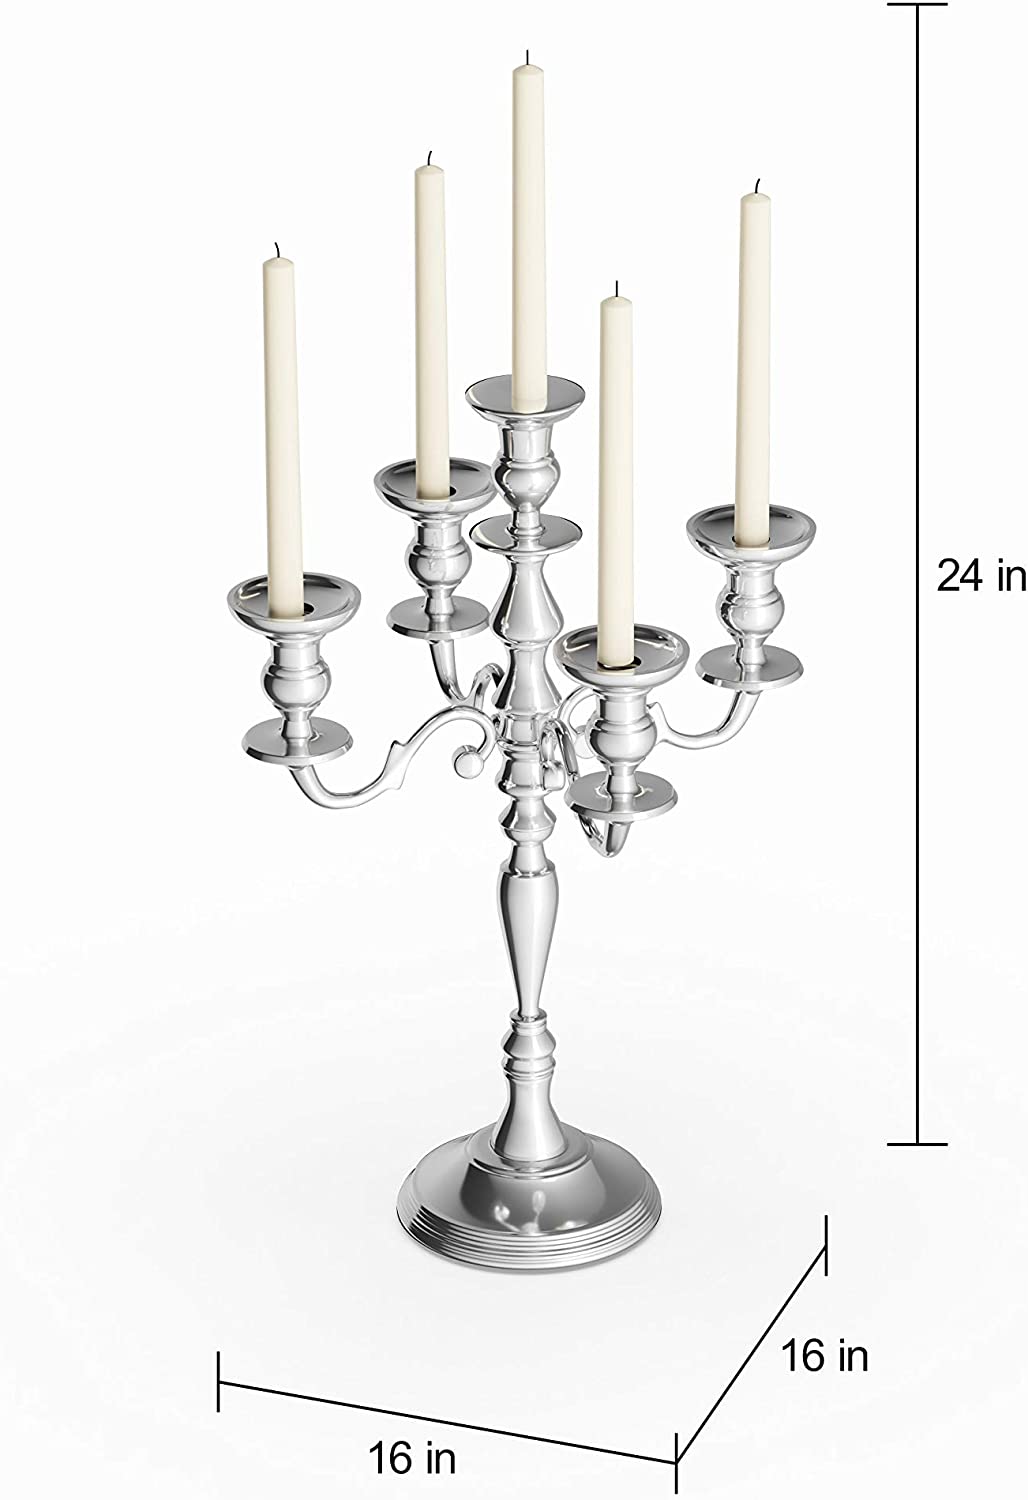 MISC Aluminum 16 inches Wide X 24 inches High Candelabra Silver